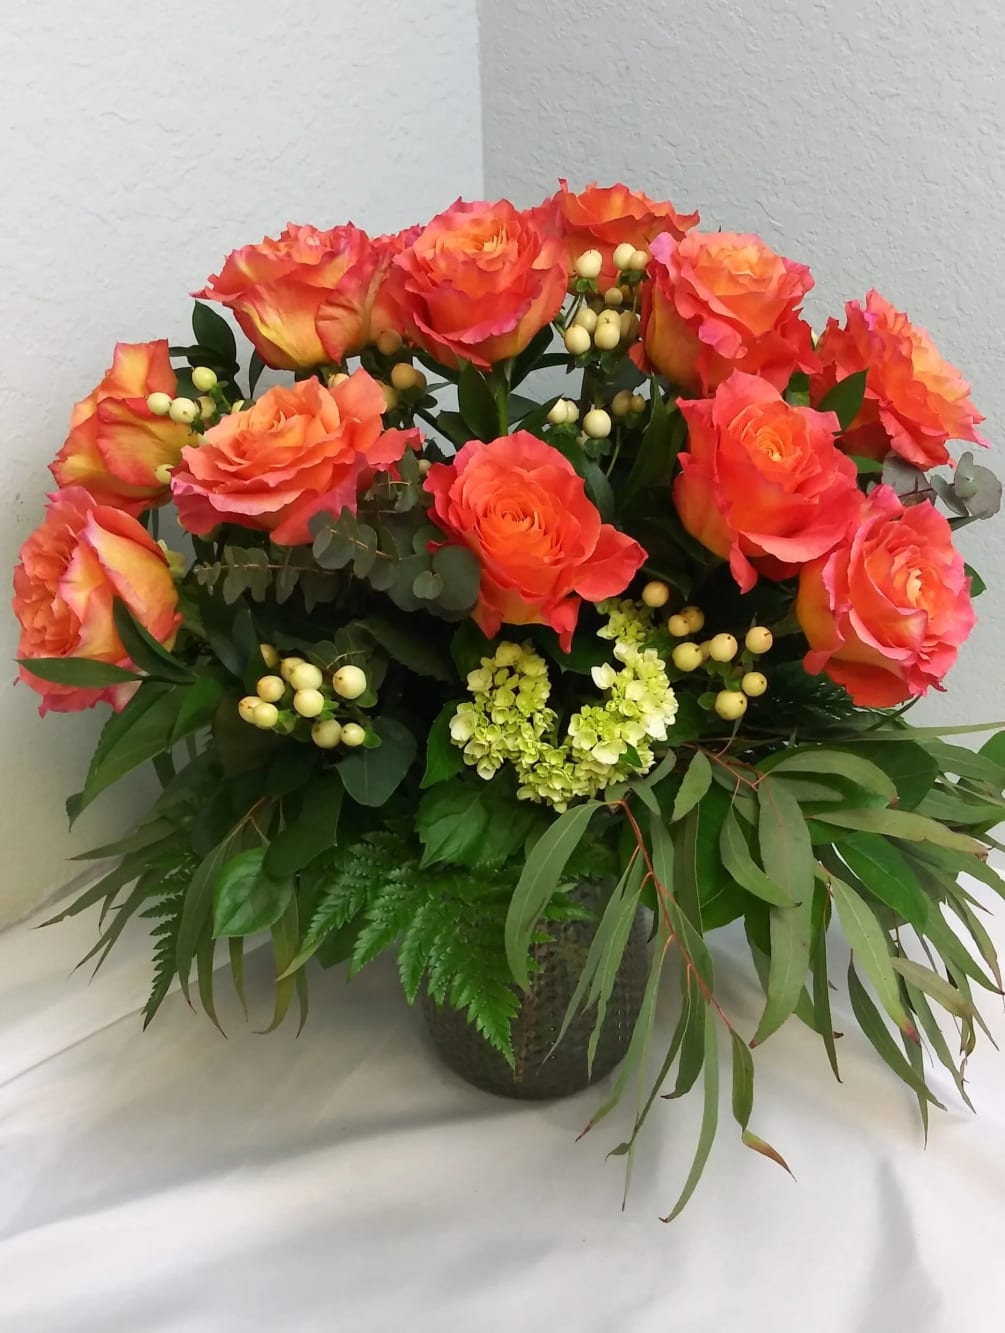 One dozen beautiful orange roses with greenery and fillers.